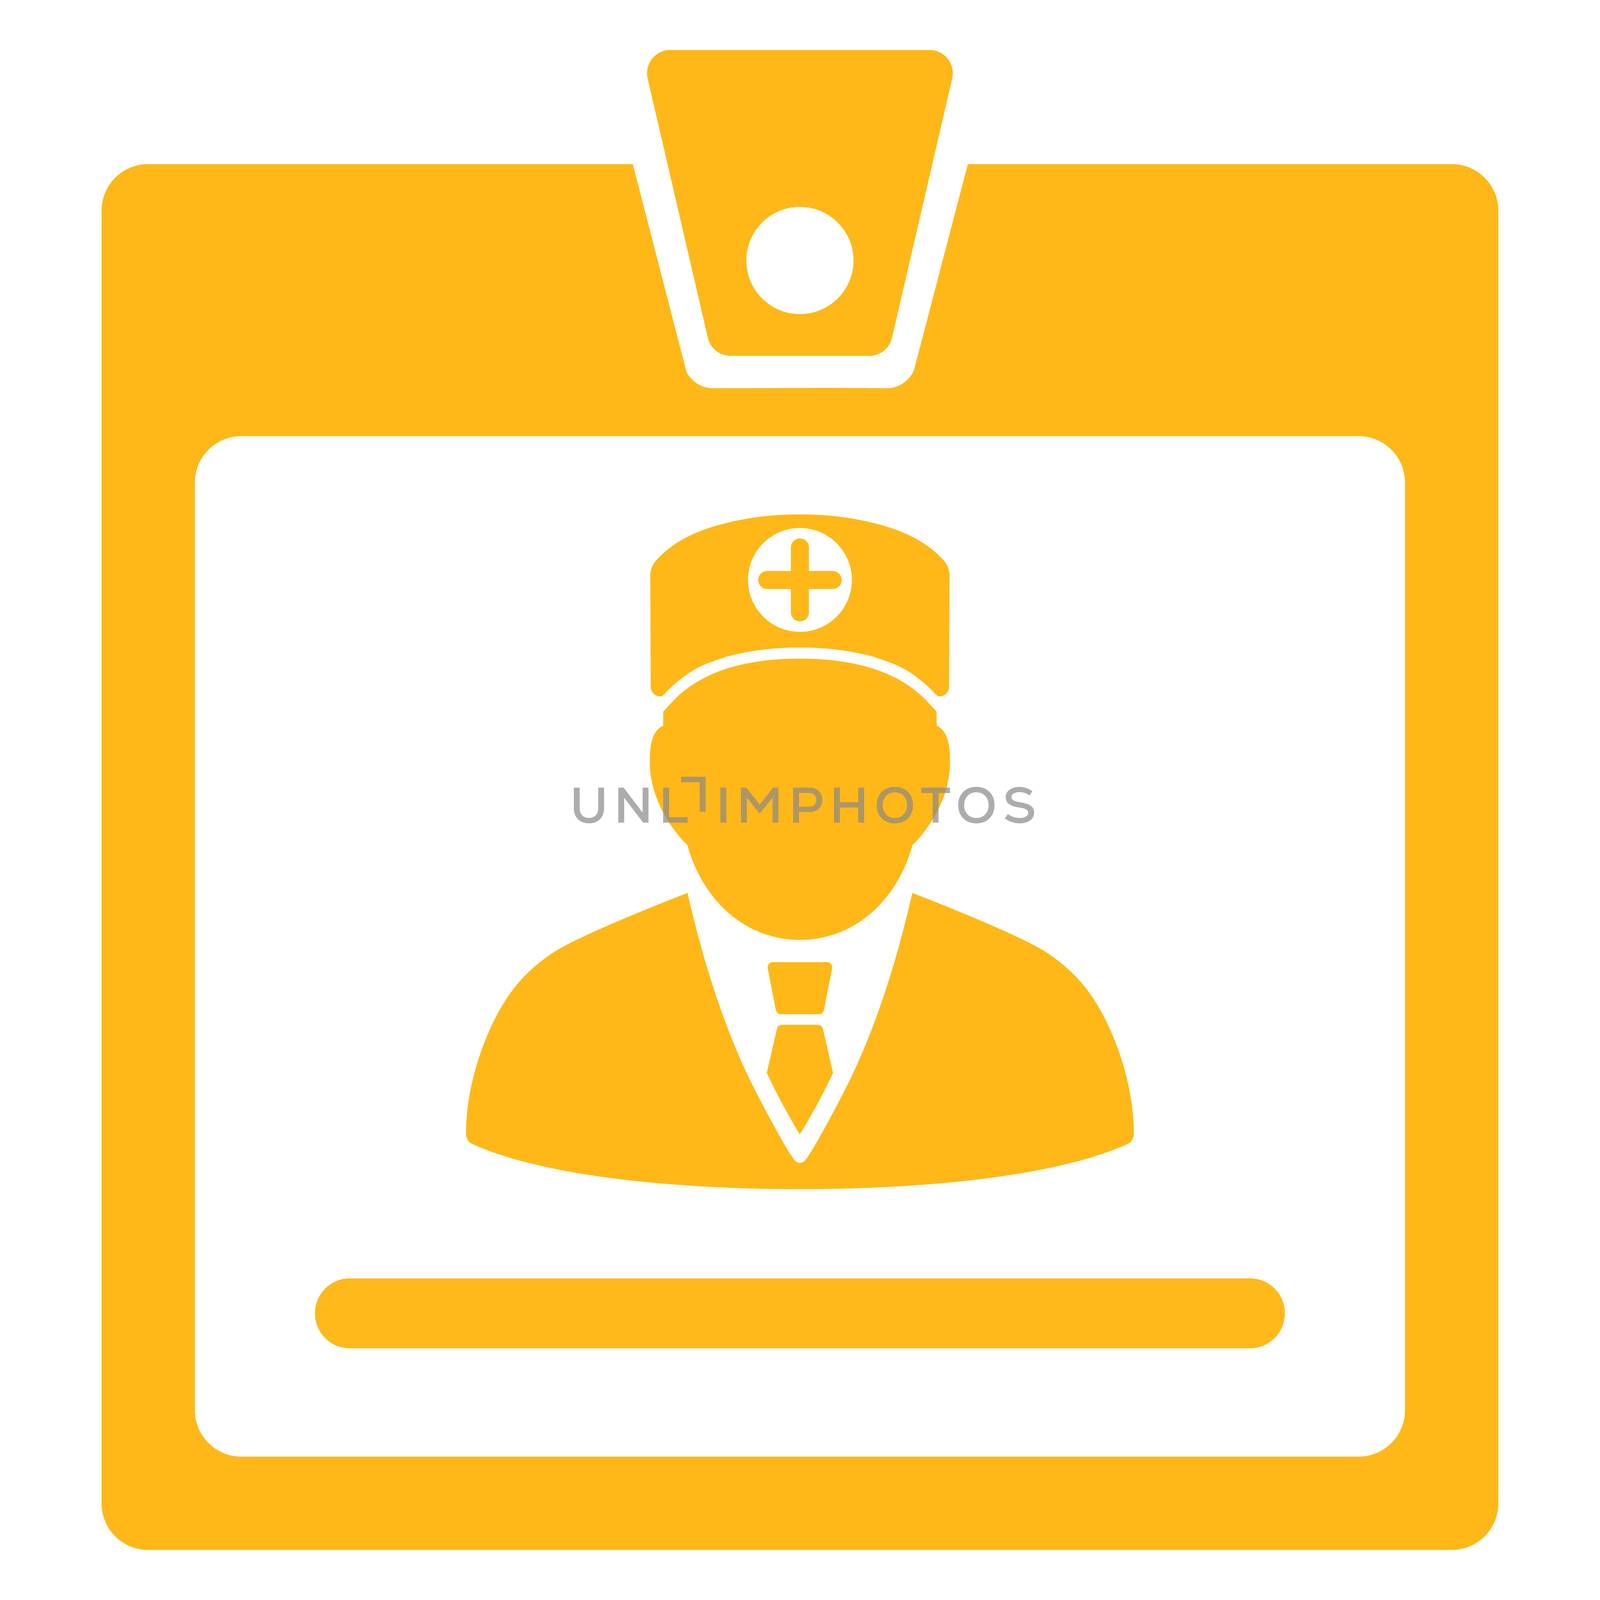 Doctor Badge raster icon. Style is flat symbol, yellow color, rounded angles, white background.